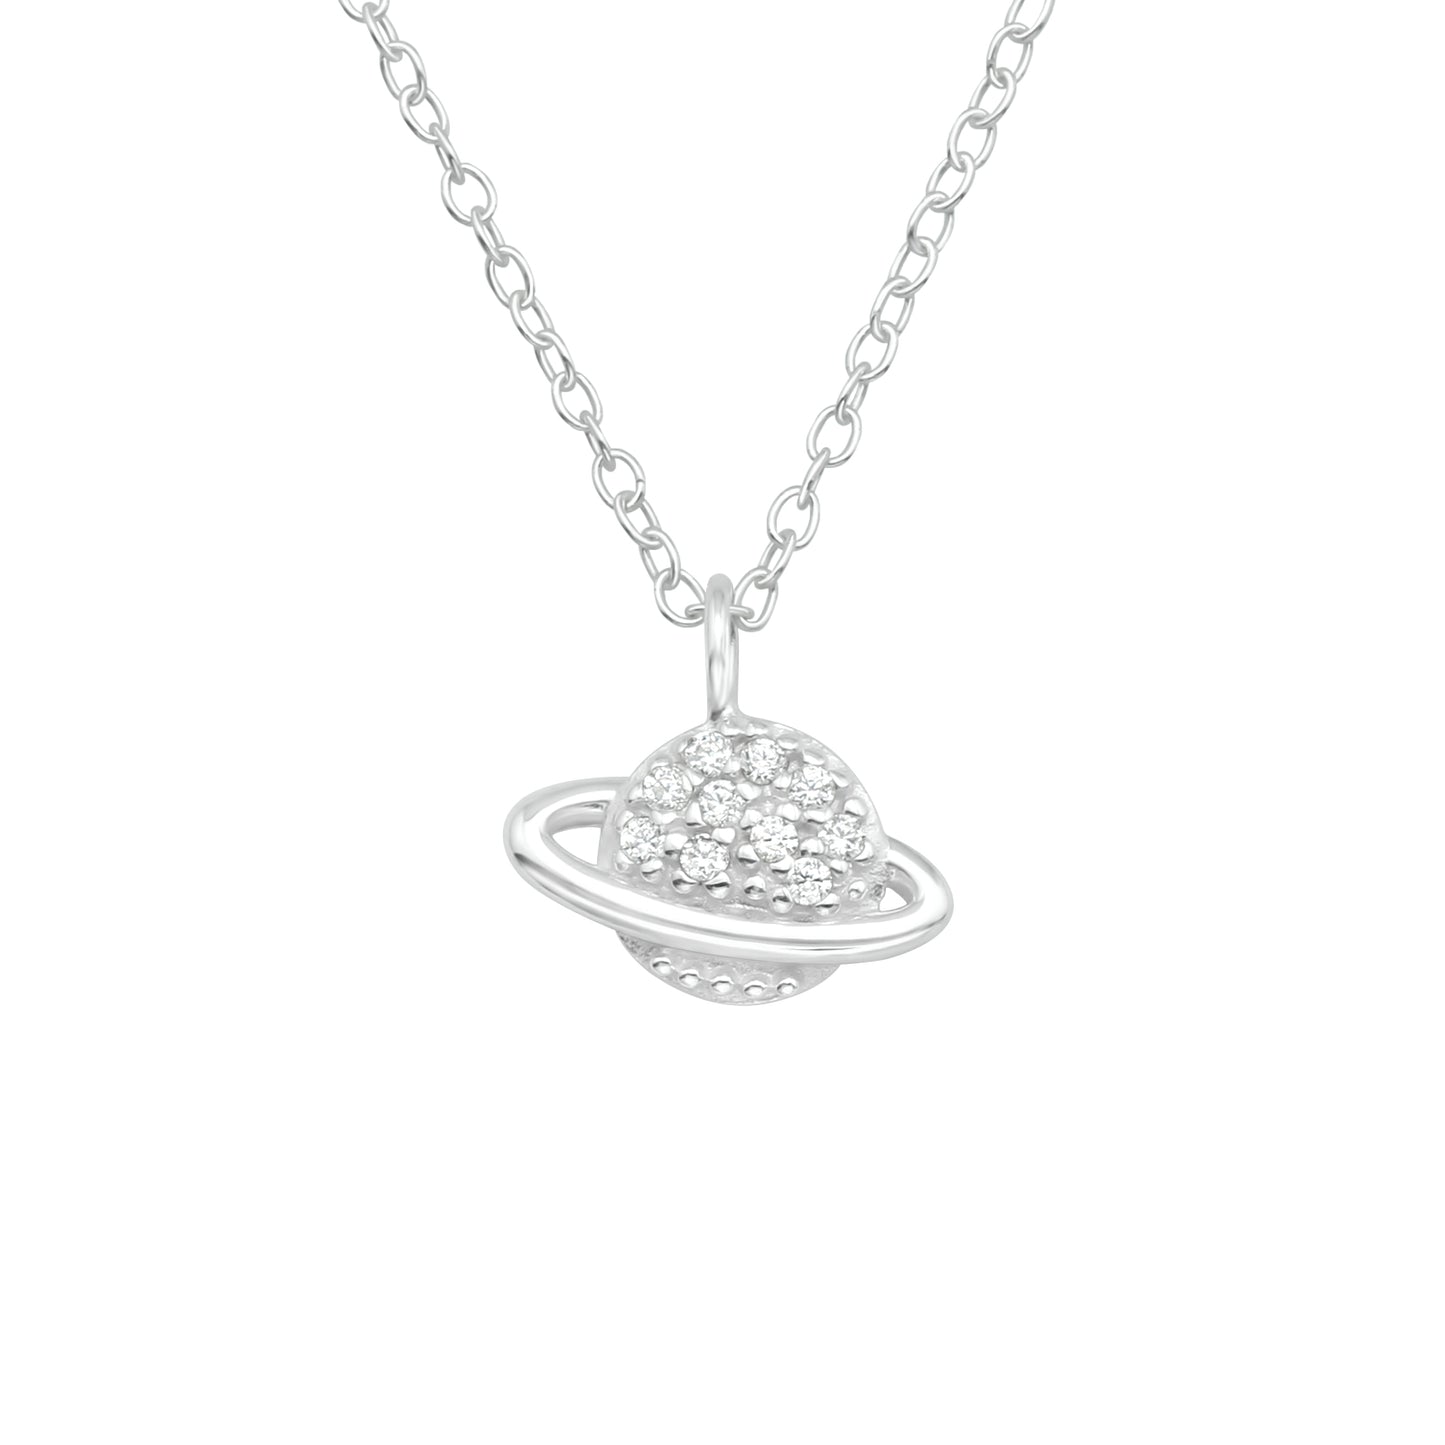 CZ Crystal Saturn Planet Pendant Necklace - 925 Sterling Silver